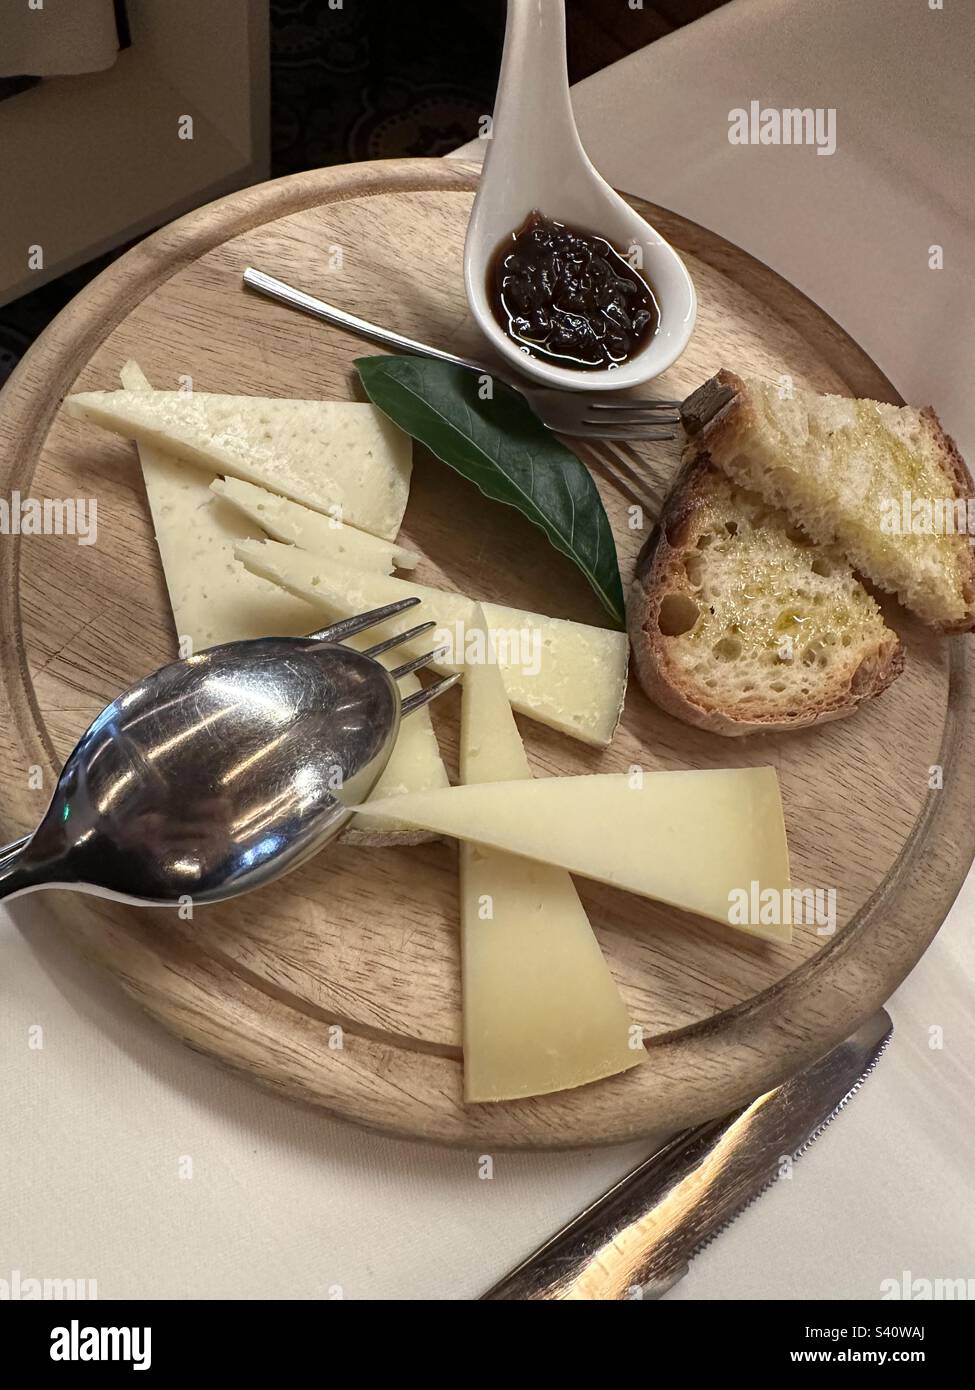 Cheese; Delicious; Food photography Stock Photo